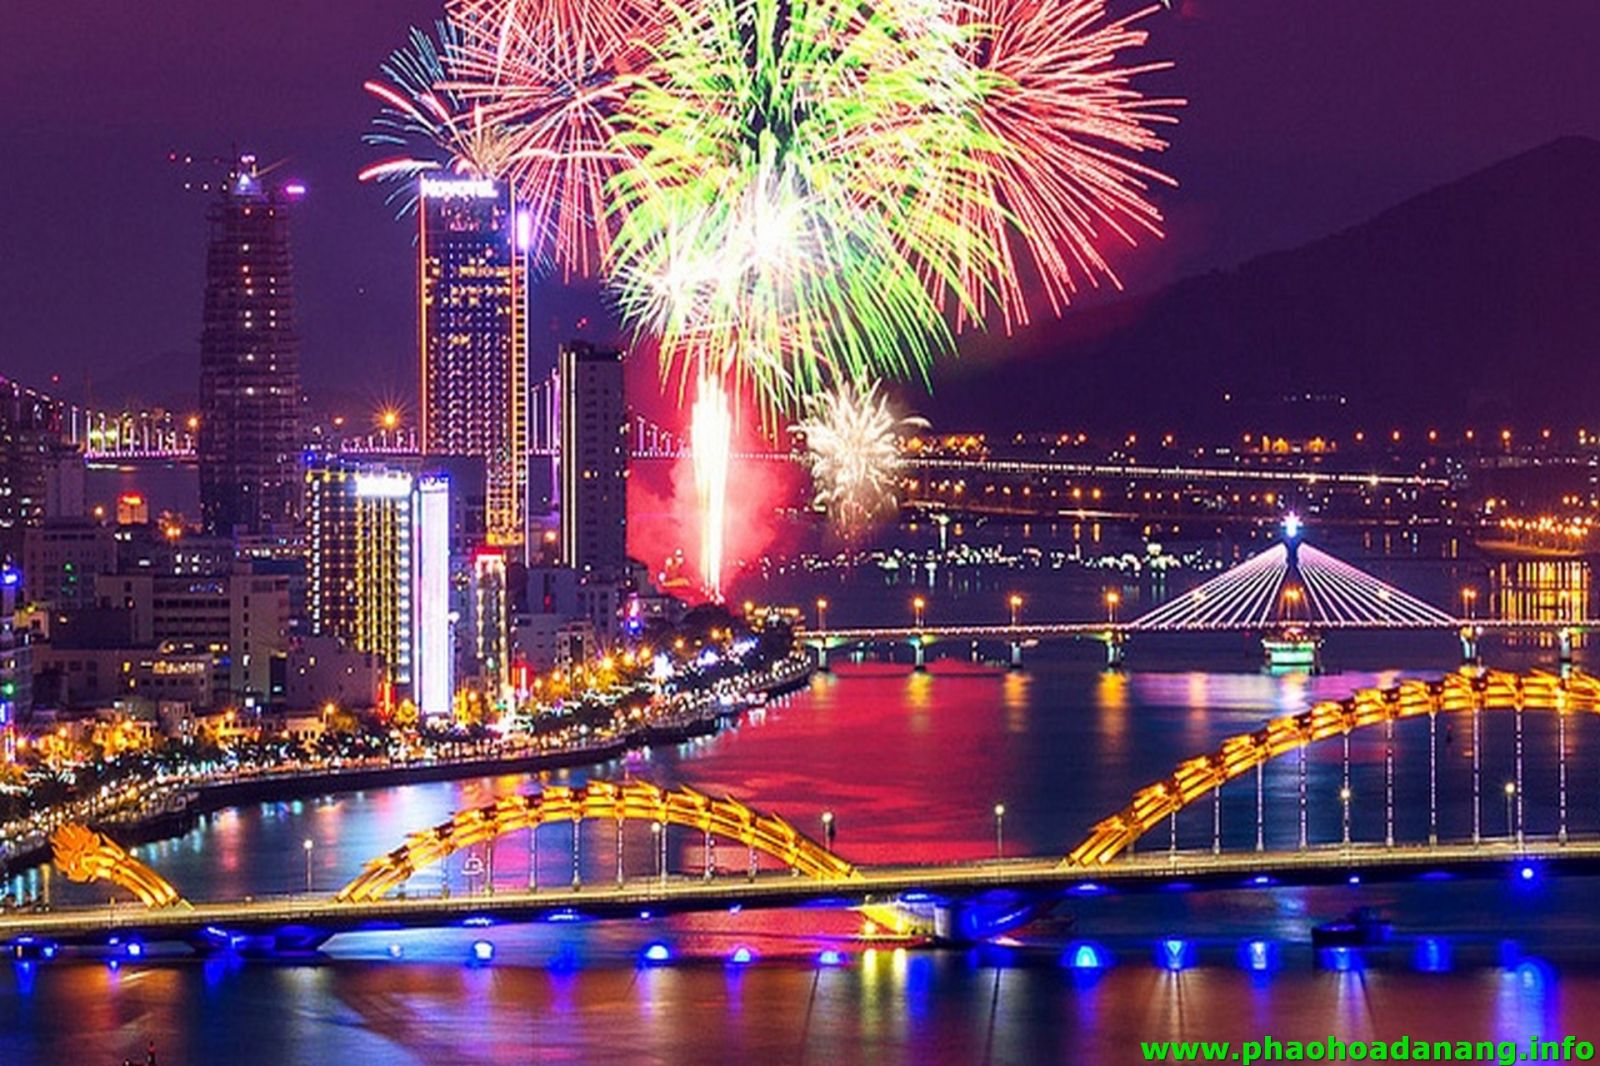 Da Nang International Fireworks Festival is one of the most outstanding annual events in the city.